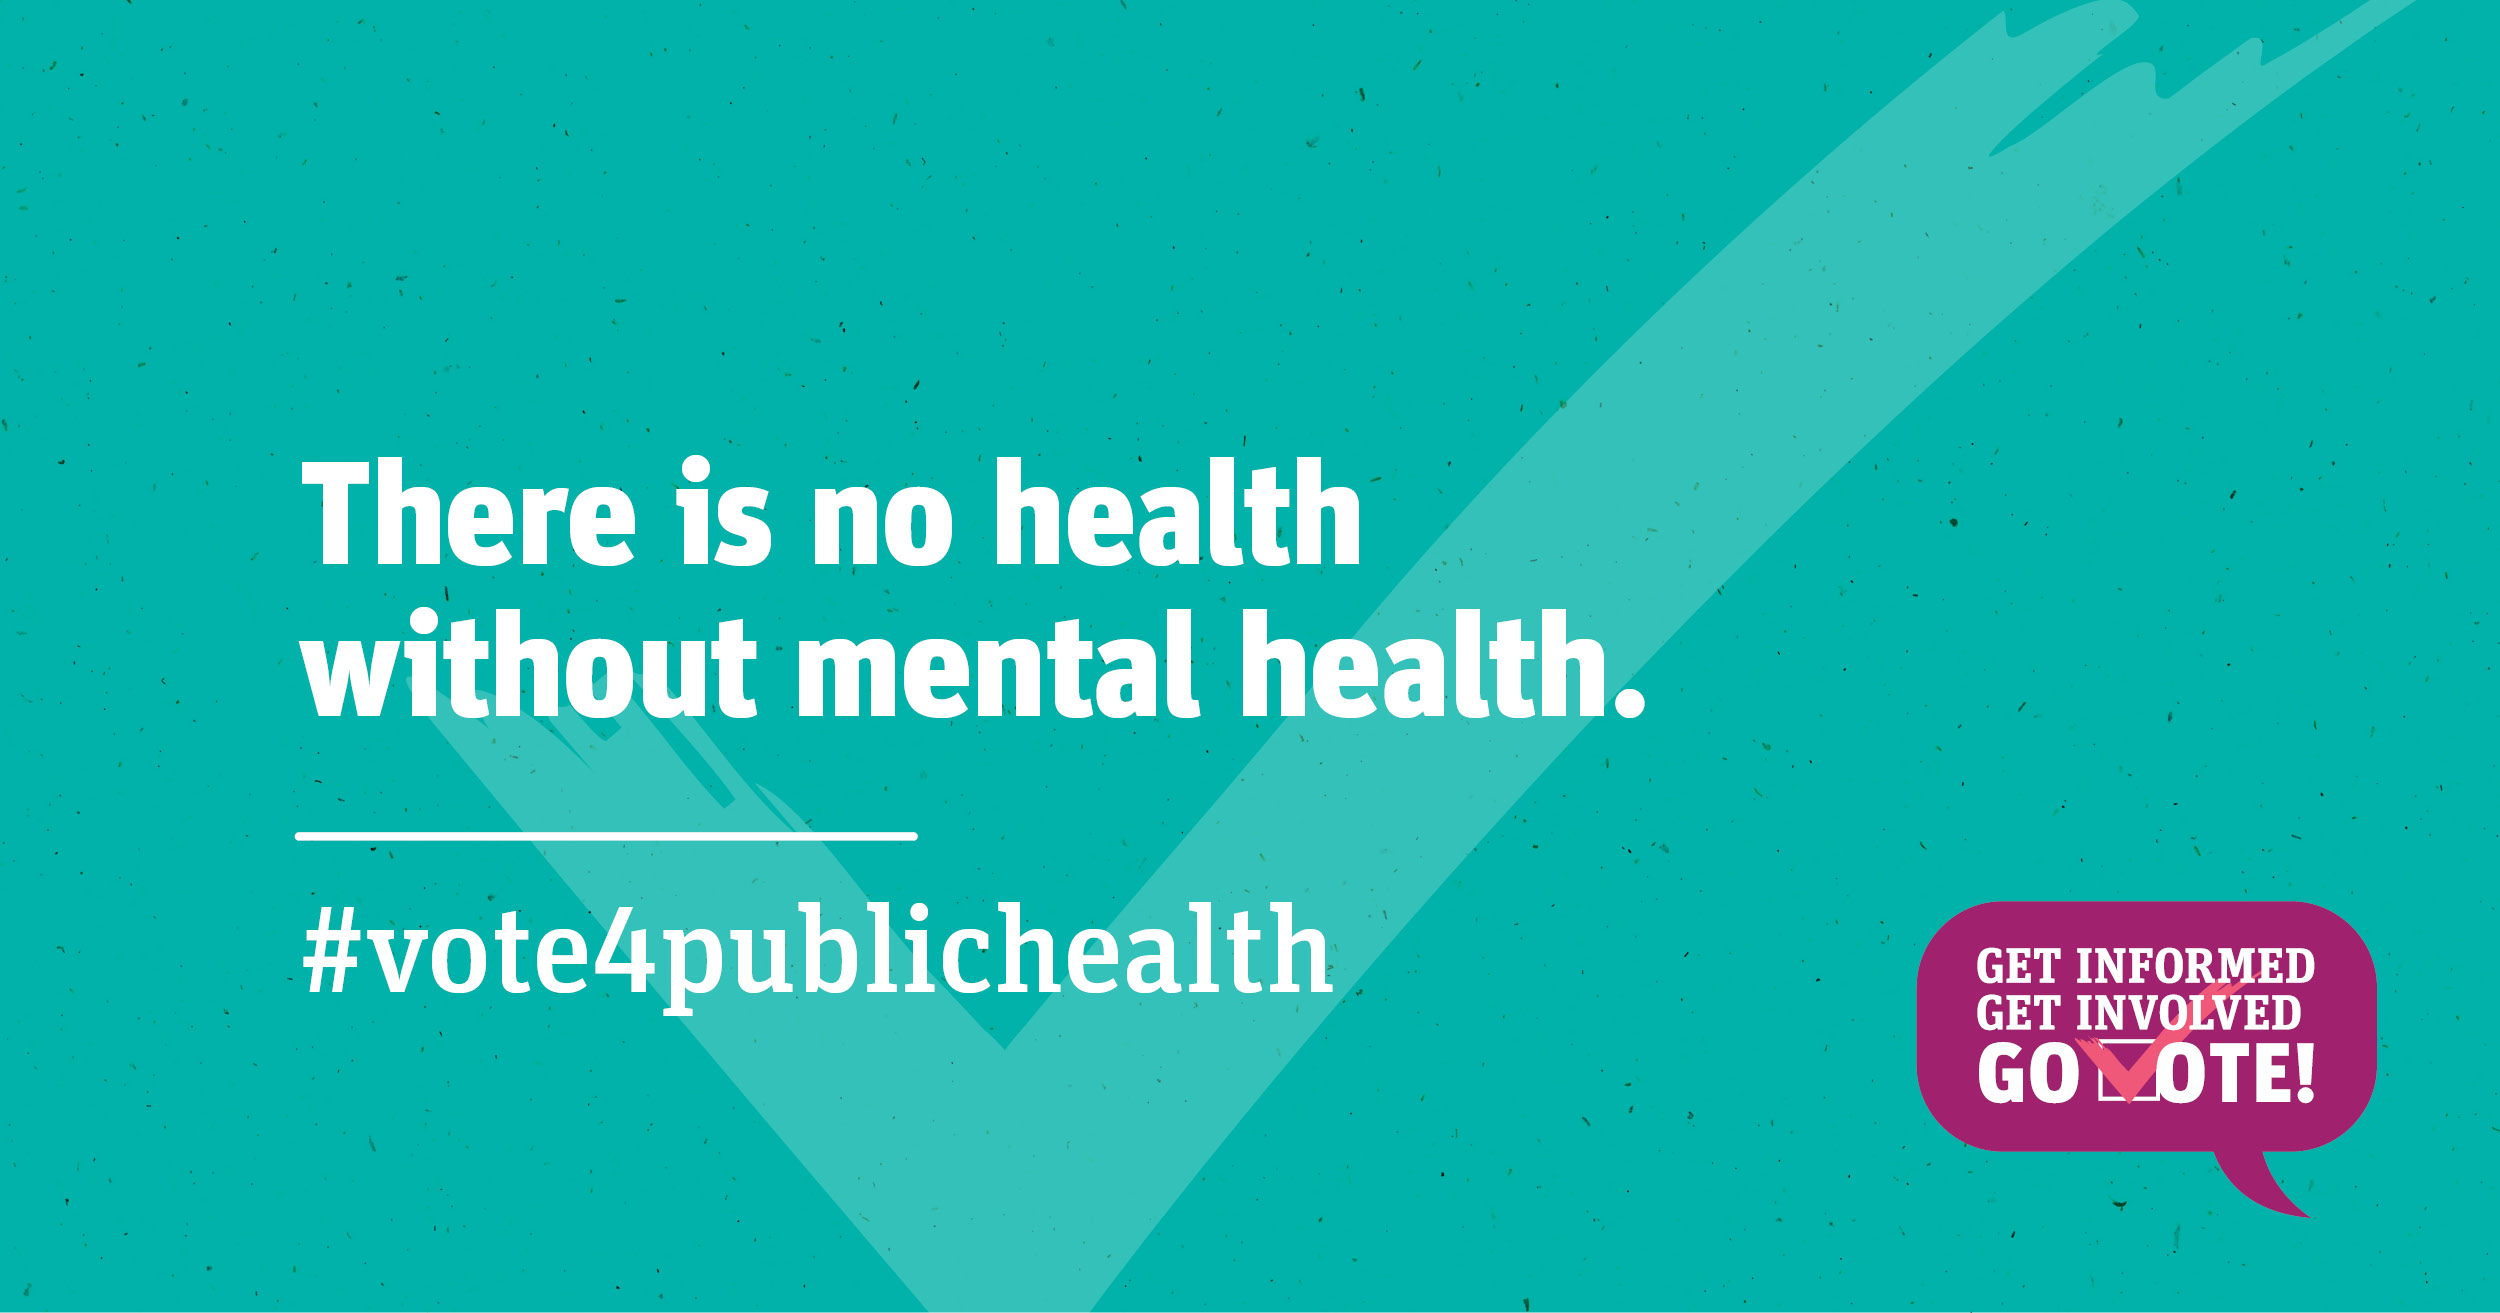 There is no health without mental health.